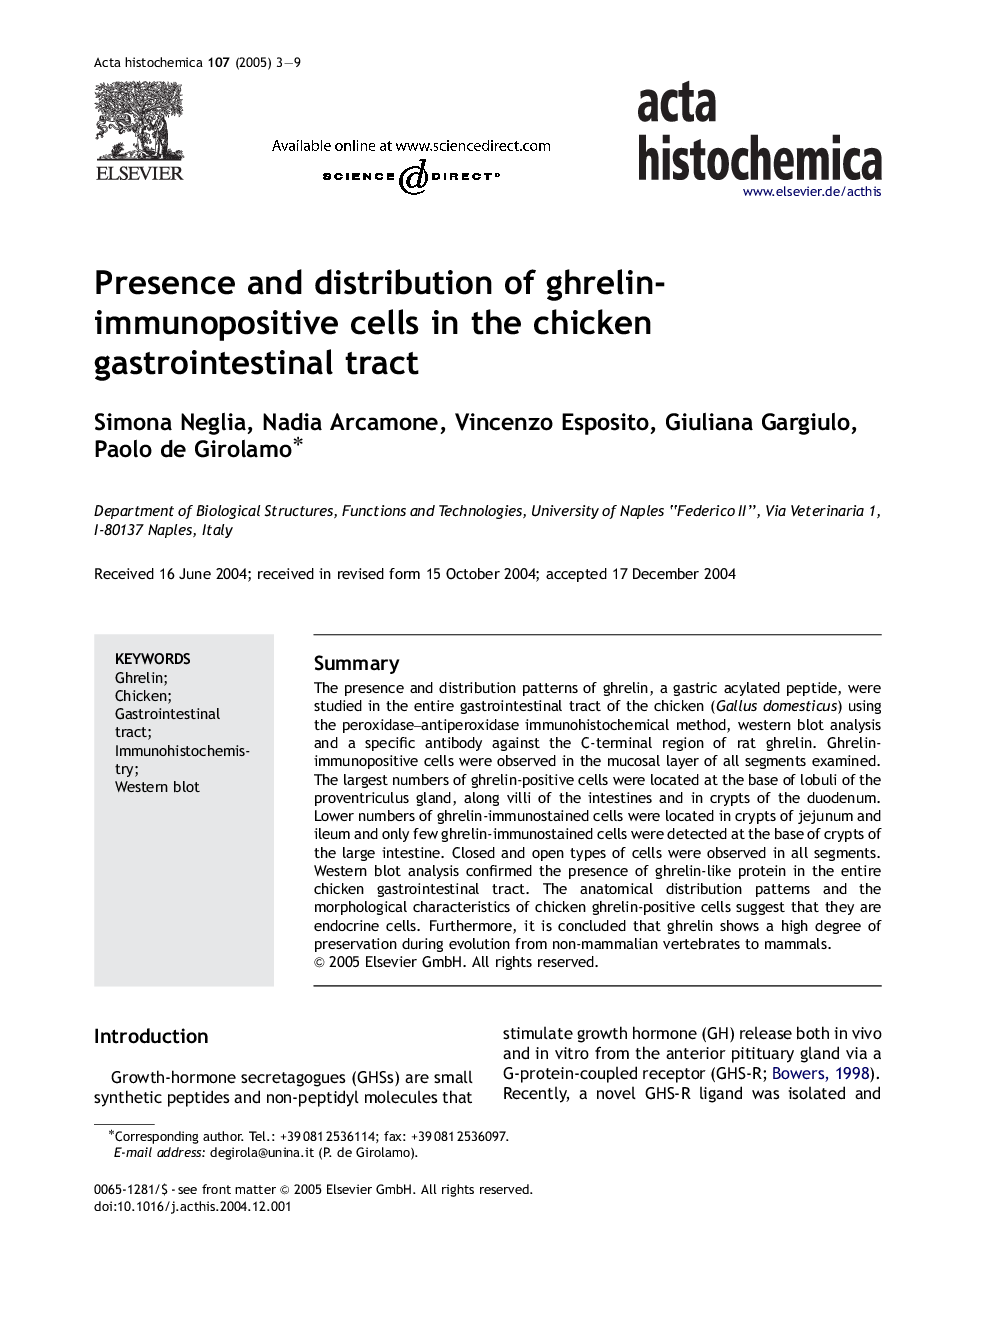 Presence and distribution of ghrelin-immunopositive cells in the chicken gastrointestinal tract